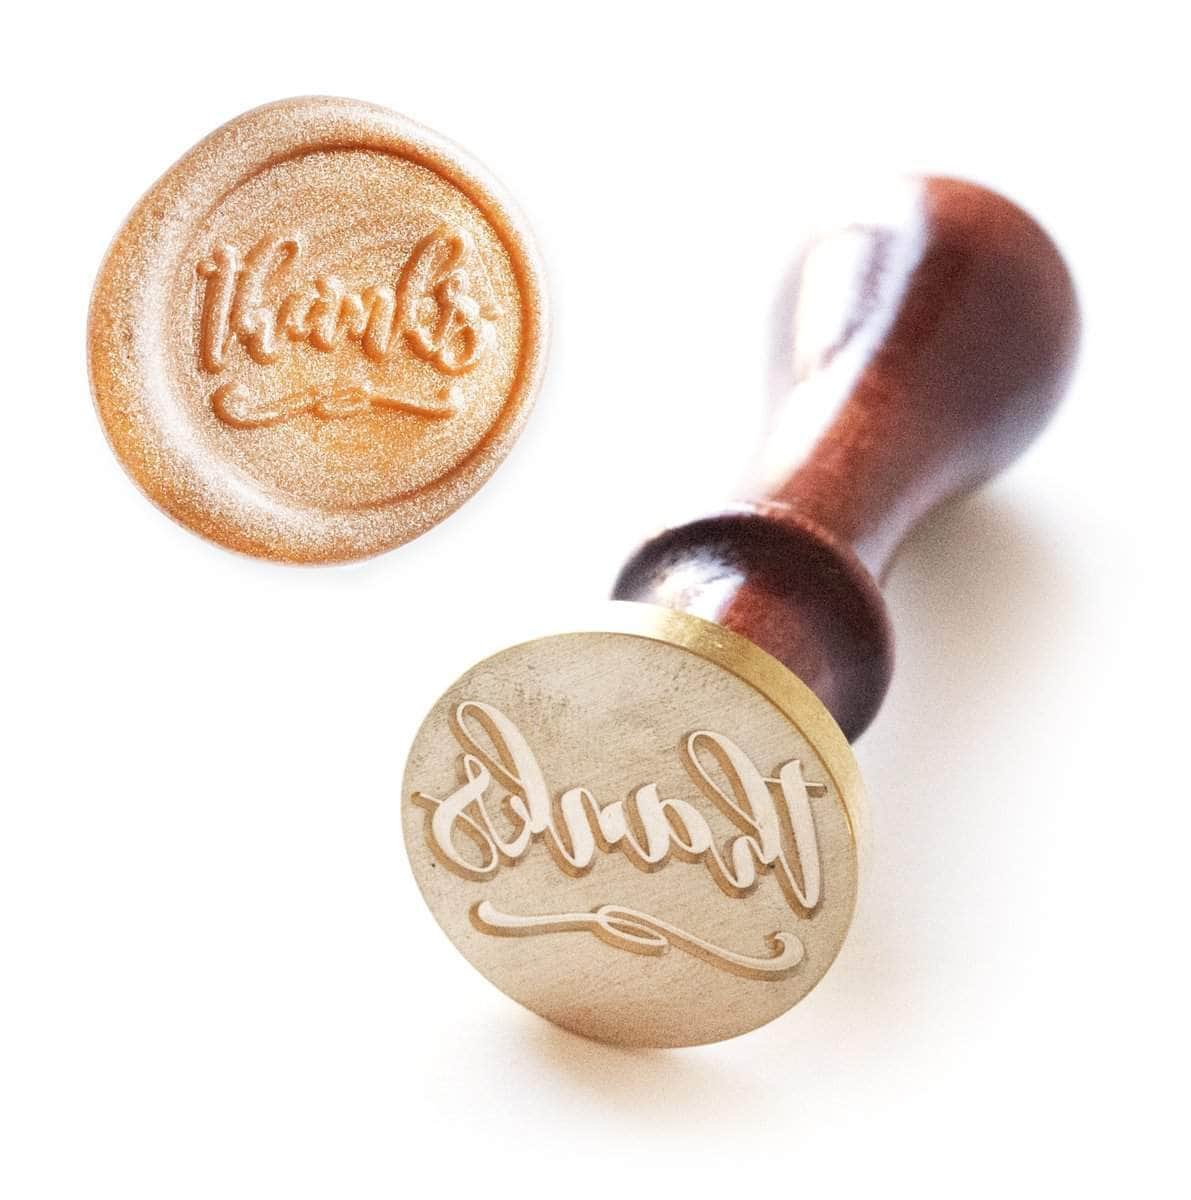 Ready Made Wax Seal Stamp - Floral Single Initial Wax Seal Stamp